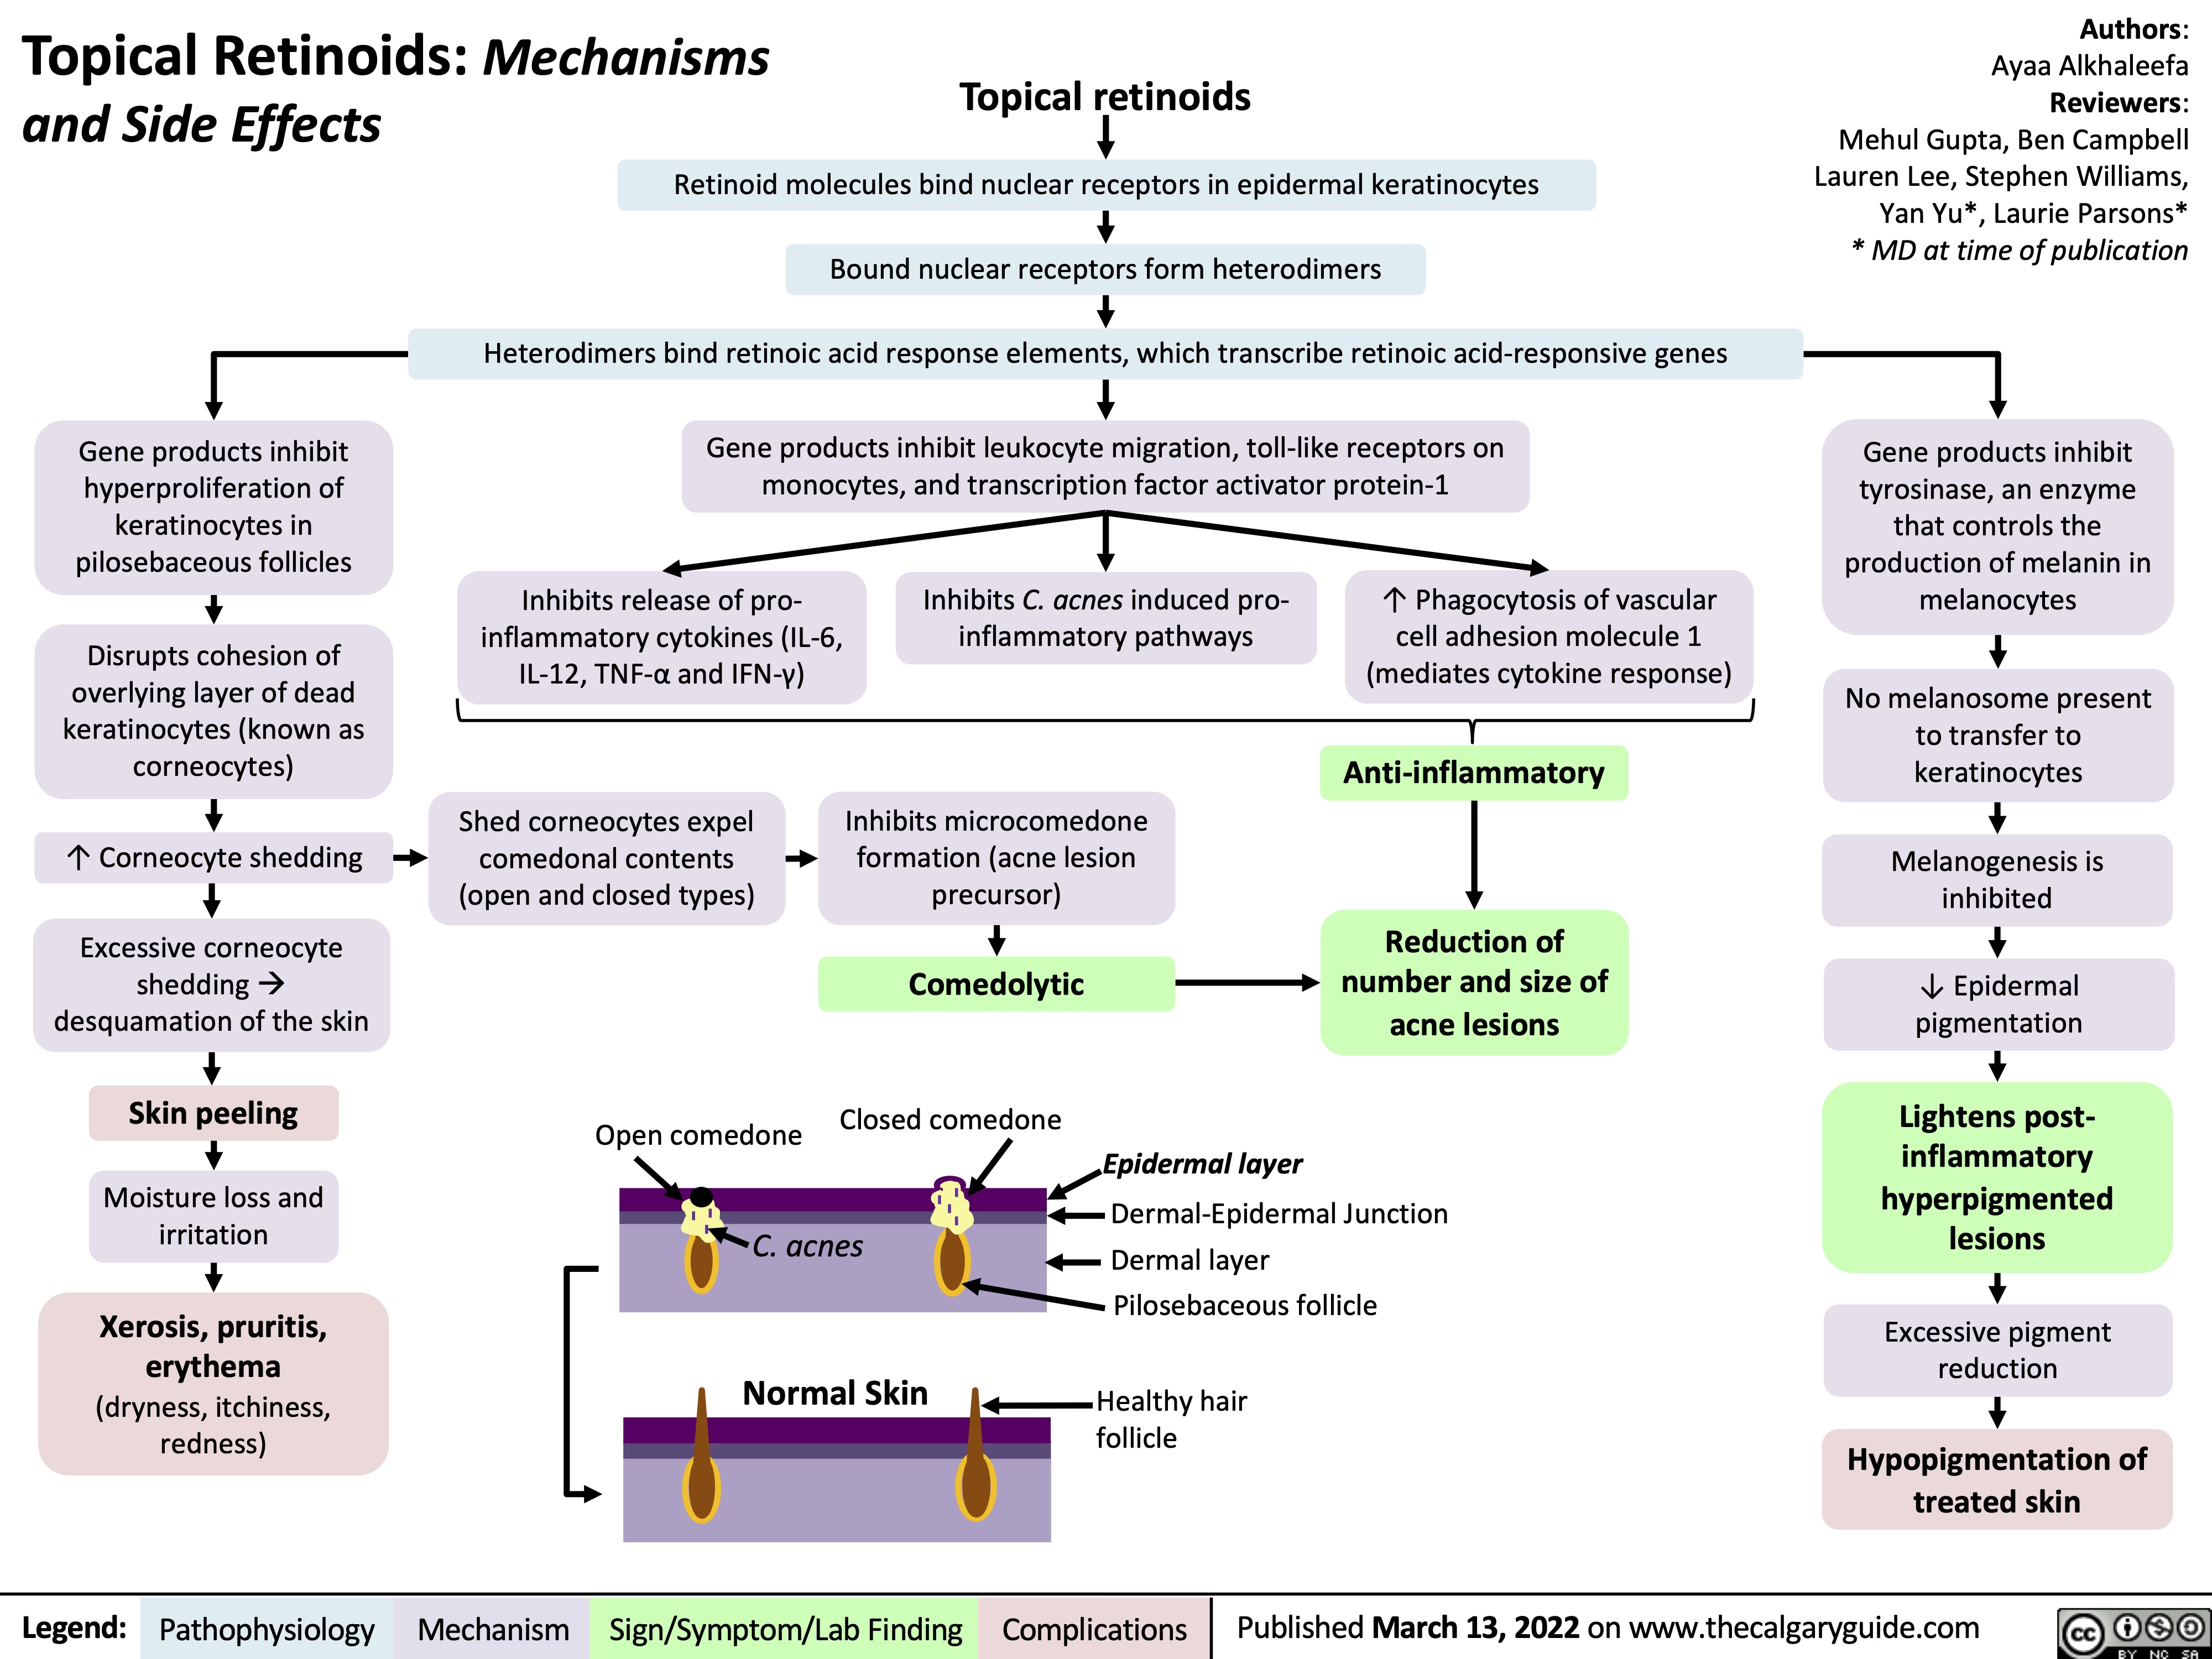 Topical Retinoids: Mechanisms and Side Effects
Topical retinoids
Authors: Ayaa Alkhaleefa Reviewers: Mehul Gupta, Ben Campbell Lauren Lee, Stephen Williams, Yan Yu*, Laurie Parsons* * MD at time of publication
Gene products inhibit tyrosinase, an enzyme that controls the production of melanin in melanocytes
No melanosome present to transfer to keratinocytes
Melanogenesis is inhibited
↓ Epidermal pigmentation
Lightens post-
inflammatory hyperpigmented lesions
Excessive pigment reduction
Hypopigmentation of treated skin
        Gene products inhibit hyperproliferation of keratinocytes in pilosebaceous follicles
Disrupts cohesion of overlying layer of dead keratinocytes (known as corneocytes)
↑ Corneocyte shedding
Excessive corneocyte sheddingà desquamation of the skin
Skin peeling
Moisture loss and irritation
Xerosis, pruritis, erythema (dryness, itchiness, redness)
Retinoid molecules bind nuclear receptors in epidermal keratinocytes
Bound nuclear receptors form heterodimers
Heterodimers bind retinoic acid response elements, which transcribe retinoic acid-responsive genes
Gene products inhibit leukocyte migration, toll-like receptors on monocytes, and transcription factor activator protein-1
    Inhibits release of pro- inflammatory cytokines (IL-6, IL-12, TNF-α and IFN-γ)
Shed corneocytes expel comedonal contents (open and closed types)
Open comedone
Inhibits C. acnes induced pro- inflammatory pathways
Inhibits microcomedone formation (acne lesion precursor)
↑ Phagocytosis of vascular cell adhesion molecule 1 (mediates cytokine response)
Anti-inflammatory
Reduction of number and size of acne lesions
             Comedolytic
Closed comedone
   Epidermal layer
   C. acnes
Normal Skin
Dermal-Epidermal Junction Dermal layer Pilosebaceous follicle
Healthy hair follicle
         Legend:
 Pathophysiology
Mechanism
Sign/Symptom/Lab Finding
 Complications
Published March 13, 2022 on www.thecalgaryguide.com
    